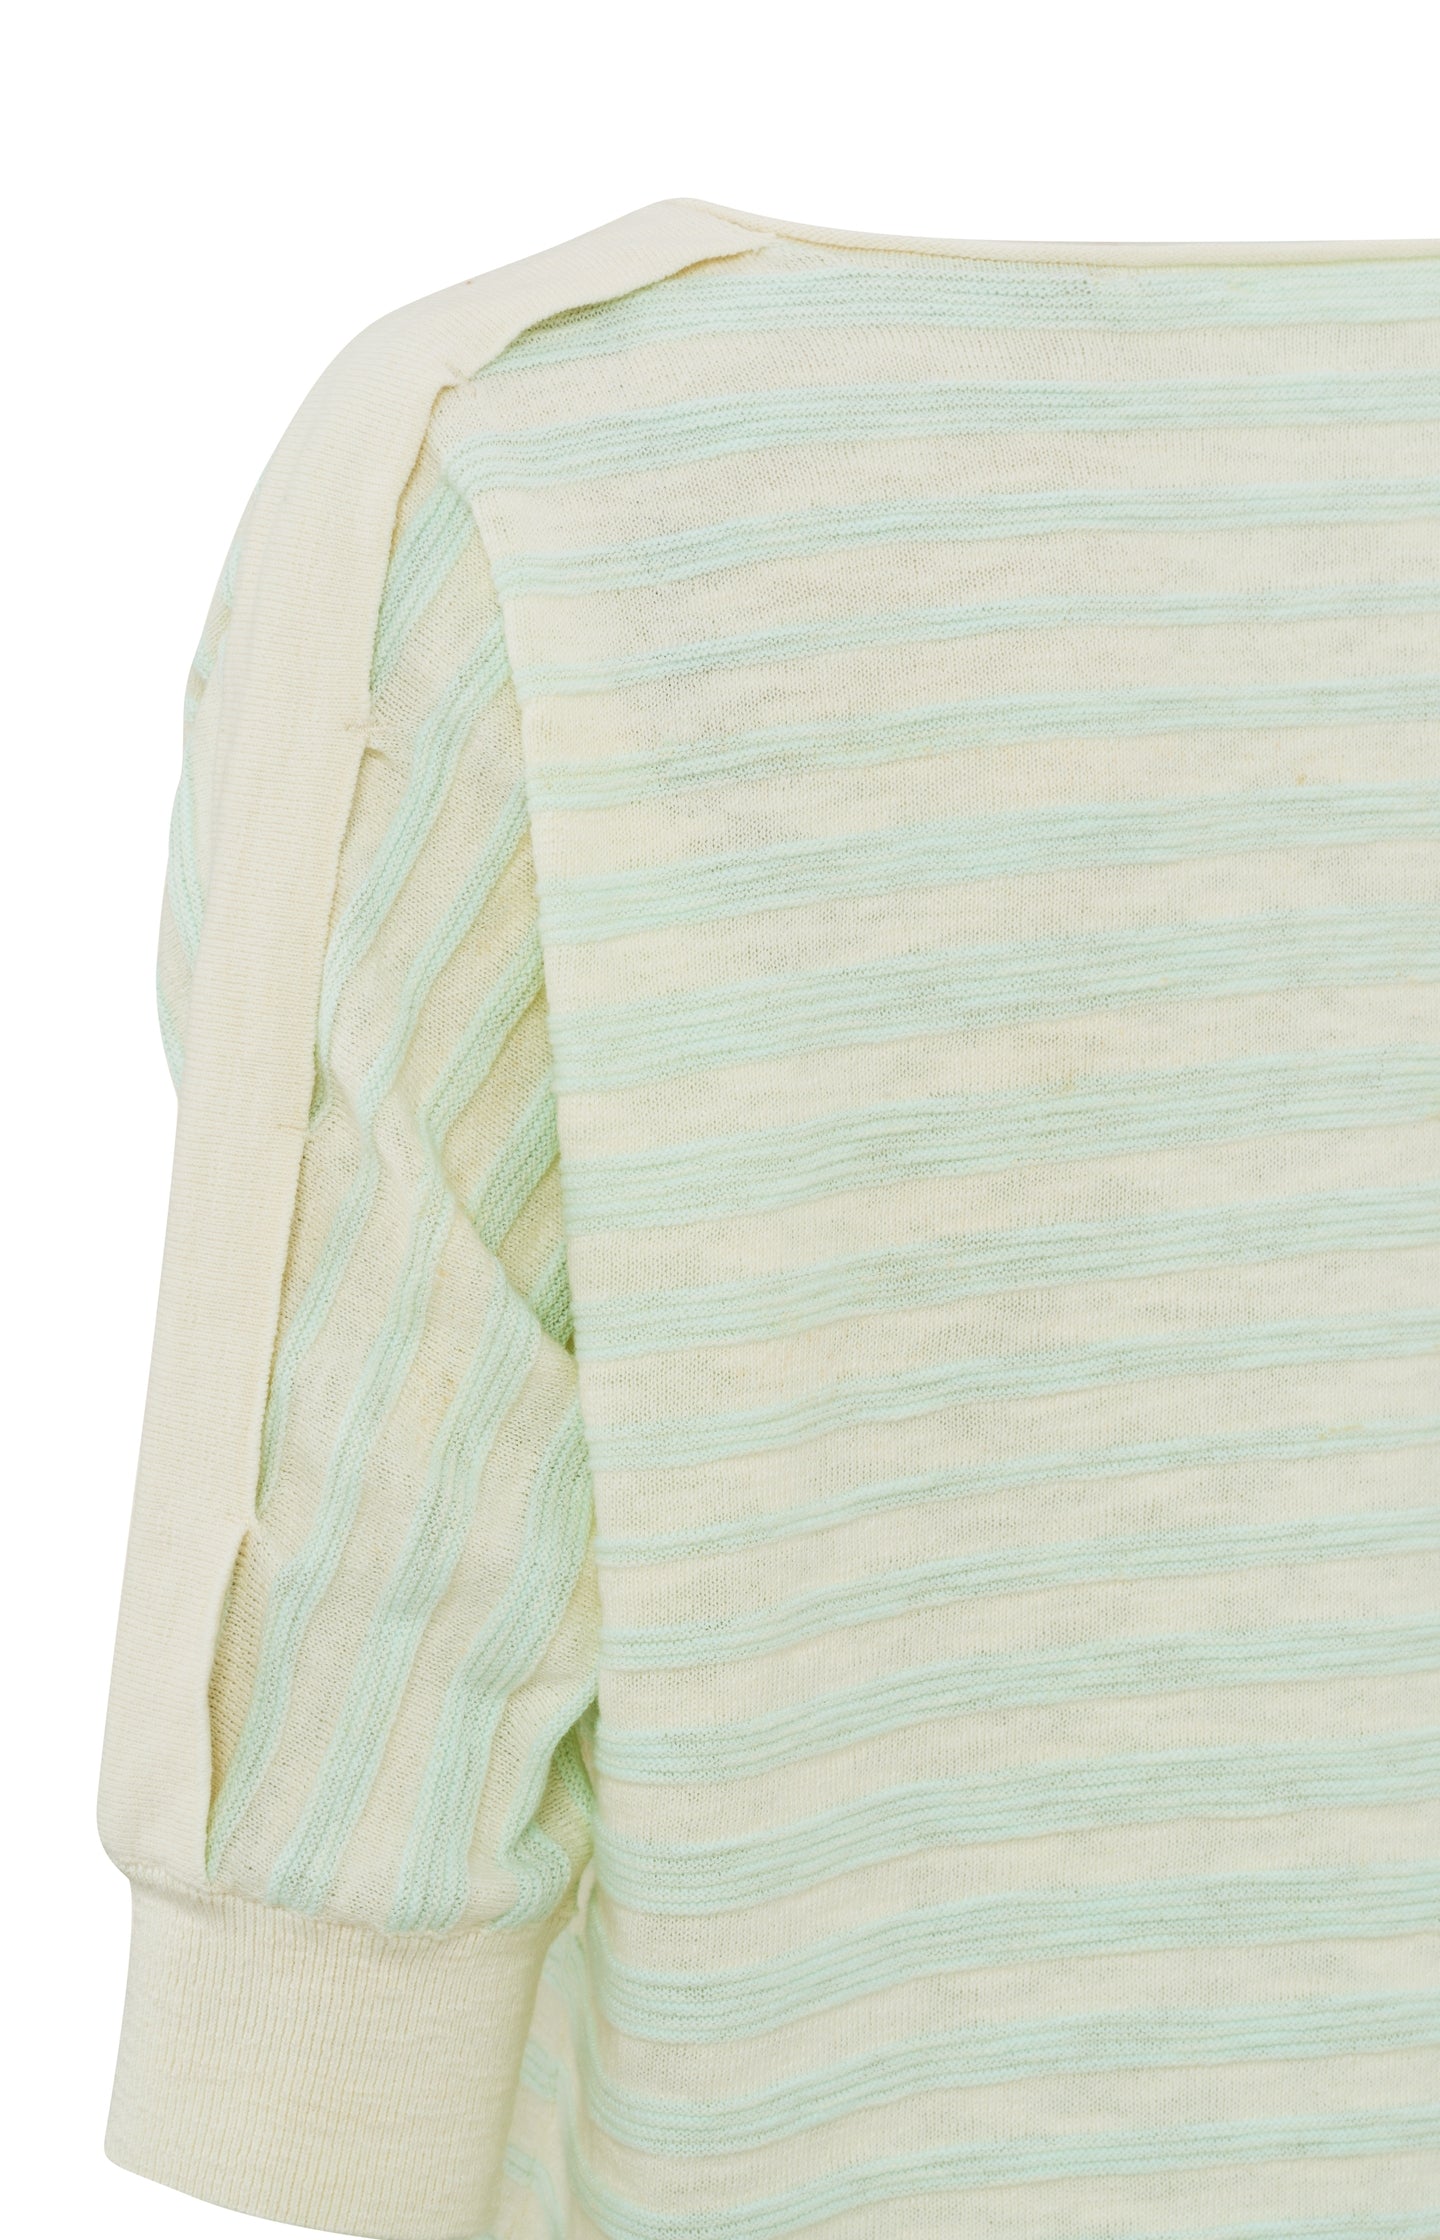 Batwing sweater with boatneck, half long sleeves and stripes - Hint Of Mint Green Dessin